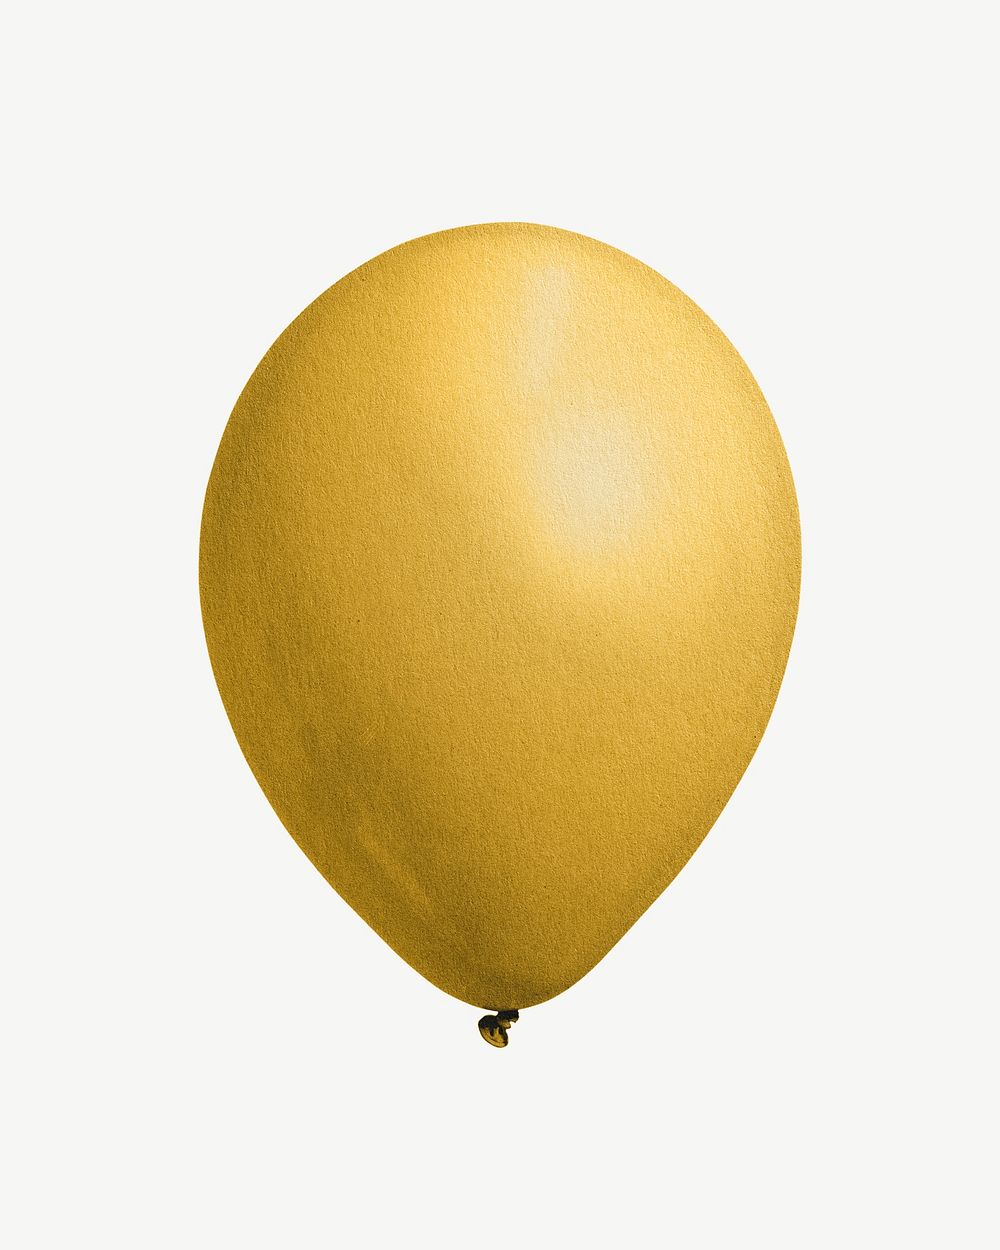 Yellow balloon, party decor collage element psd